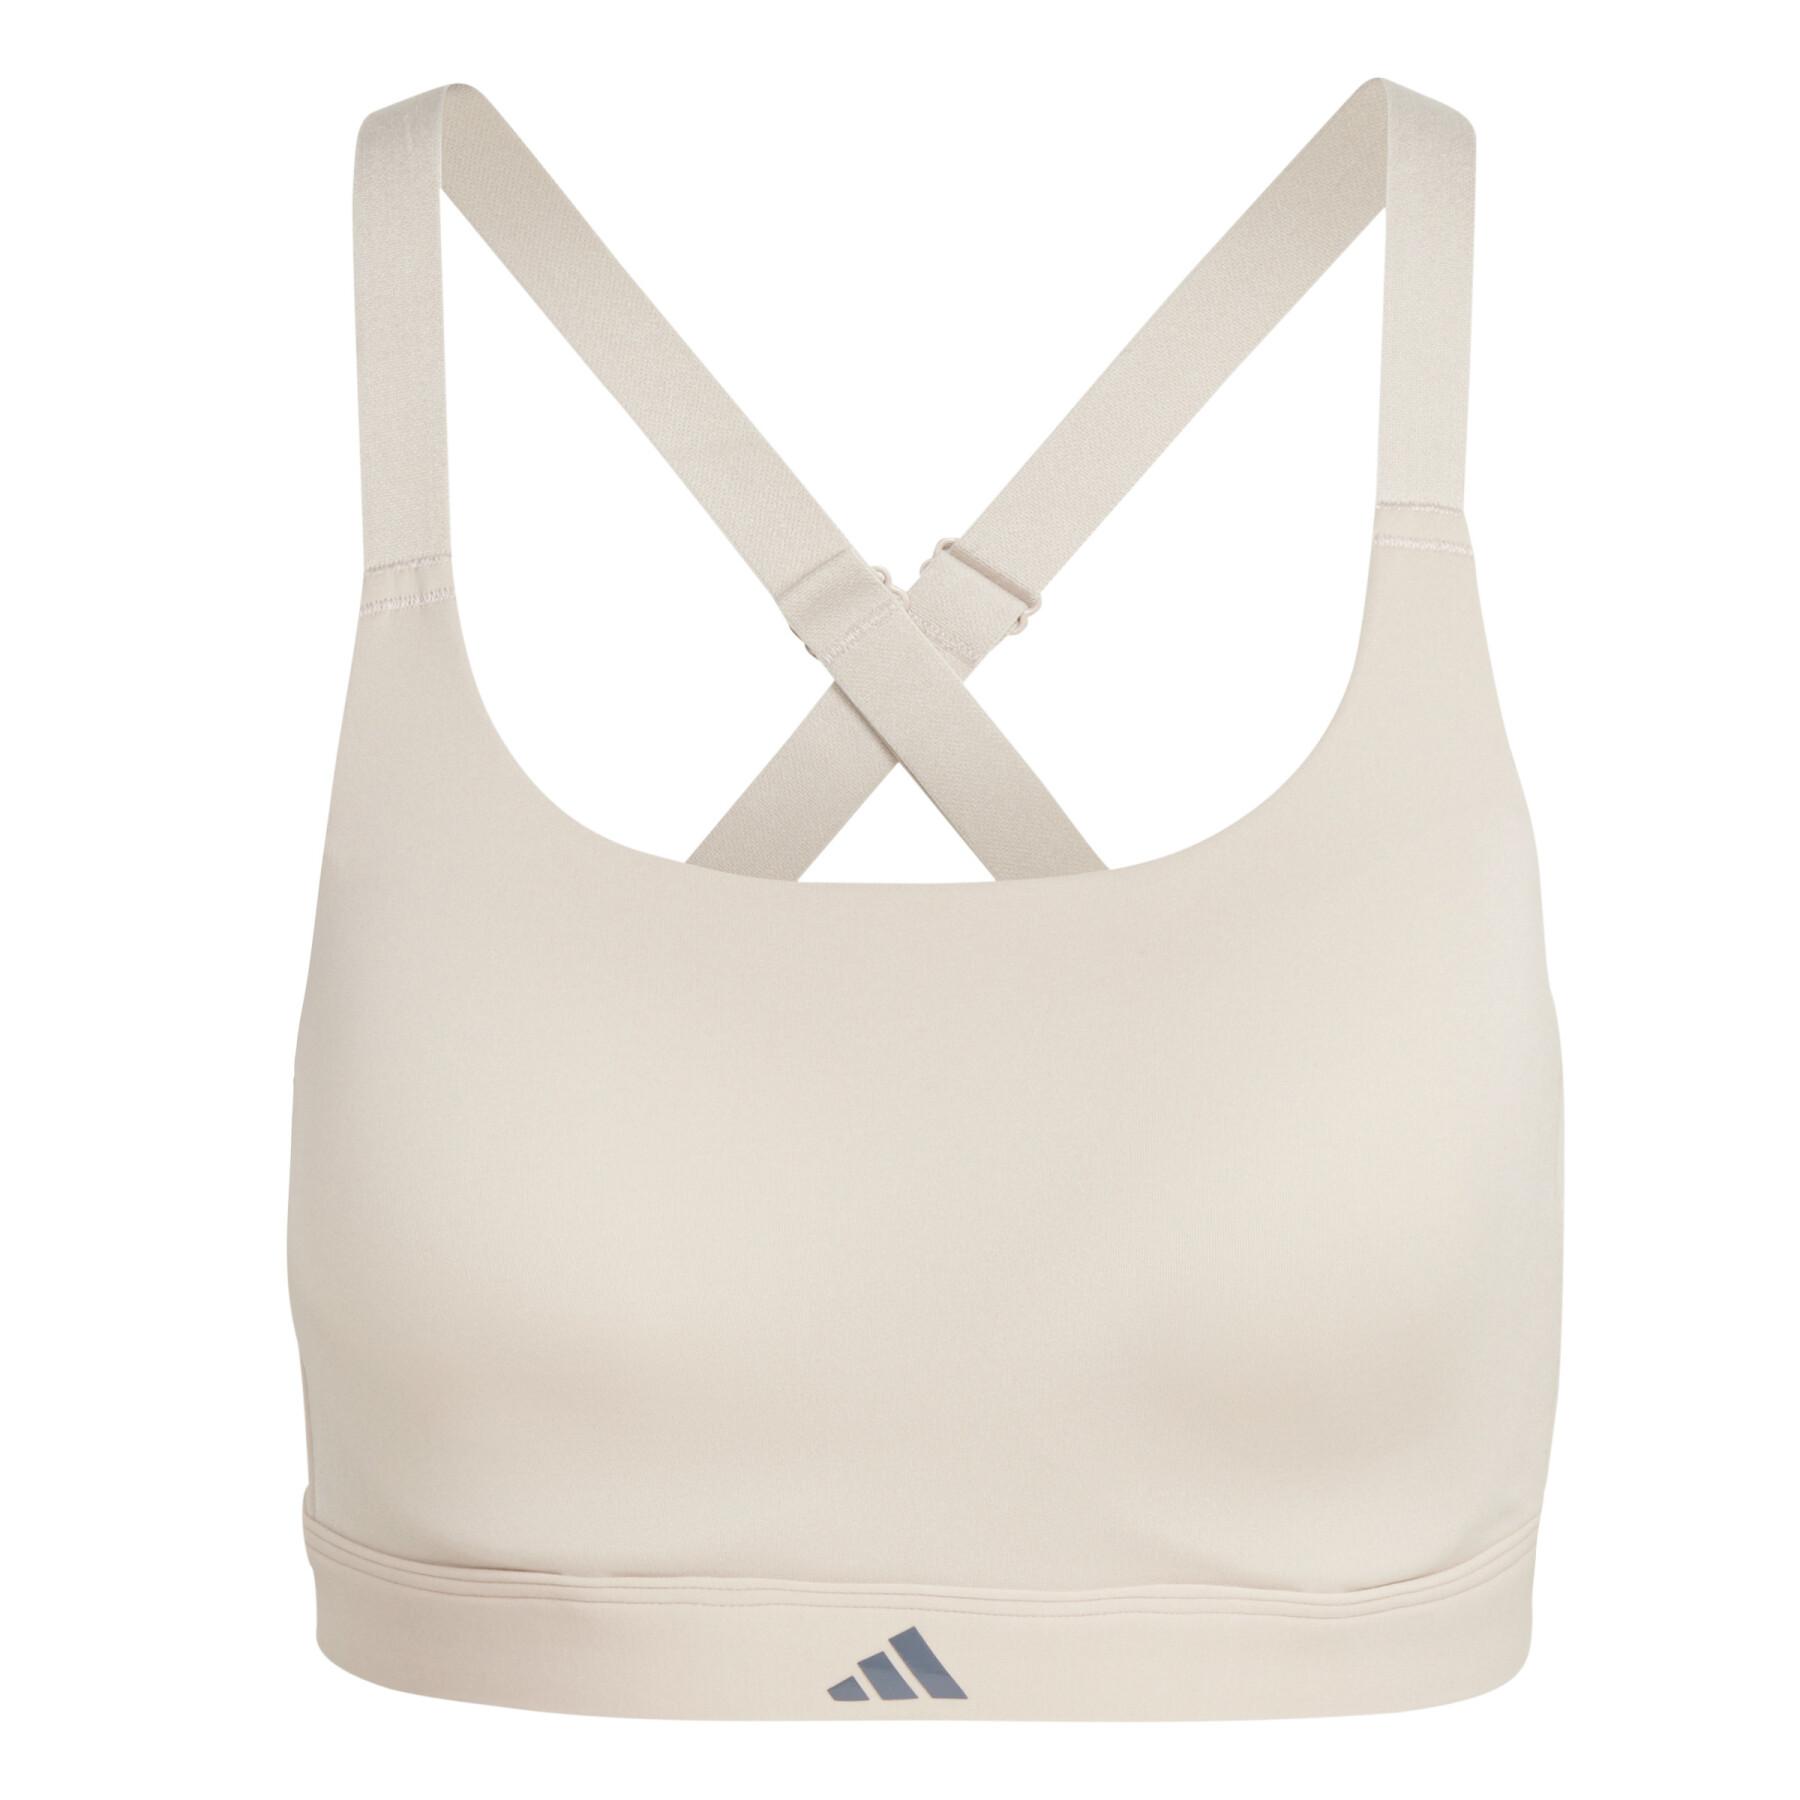 Custom-made high support bra for women adidas Impact Luxe - adidas